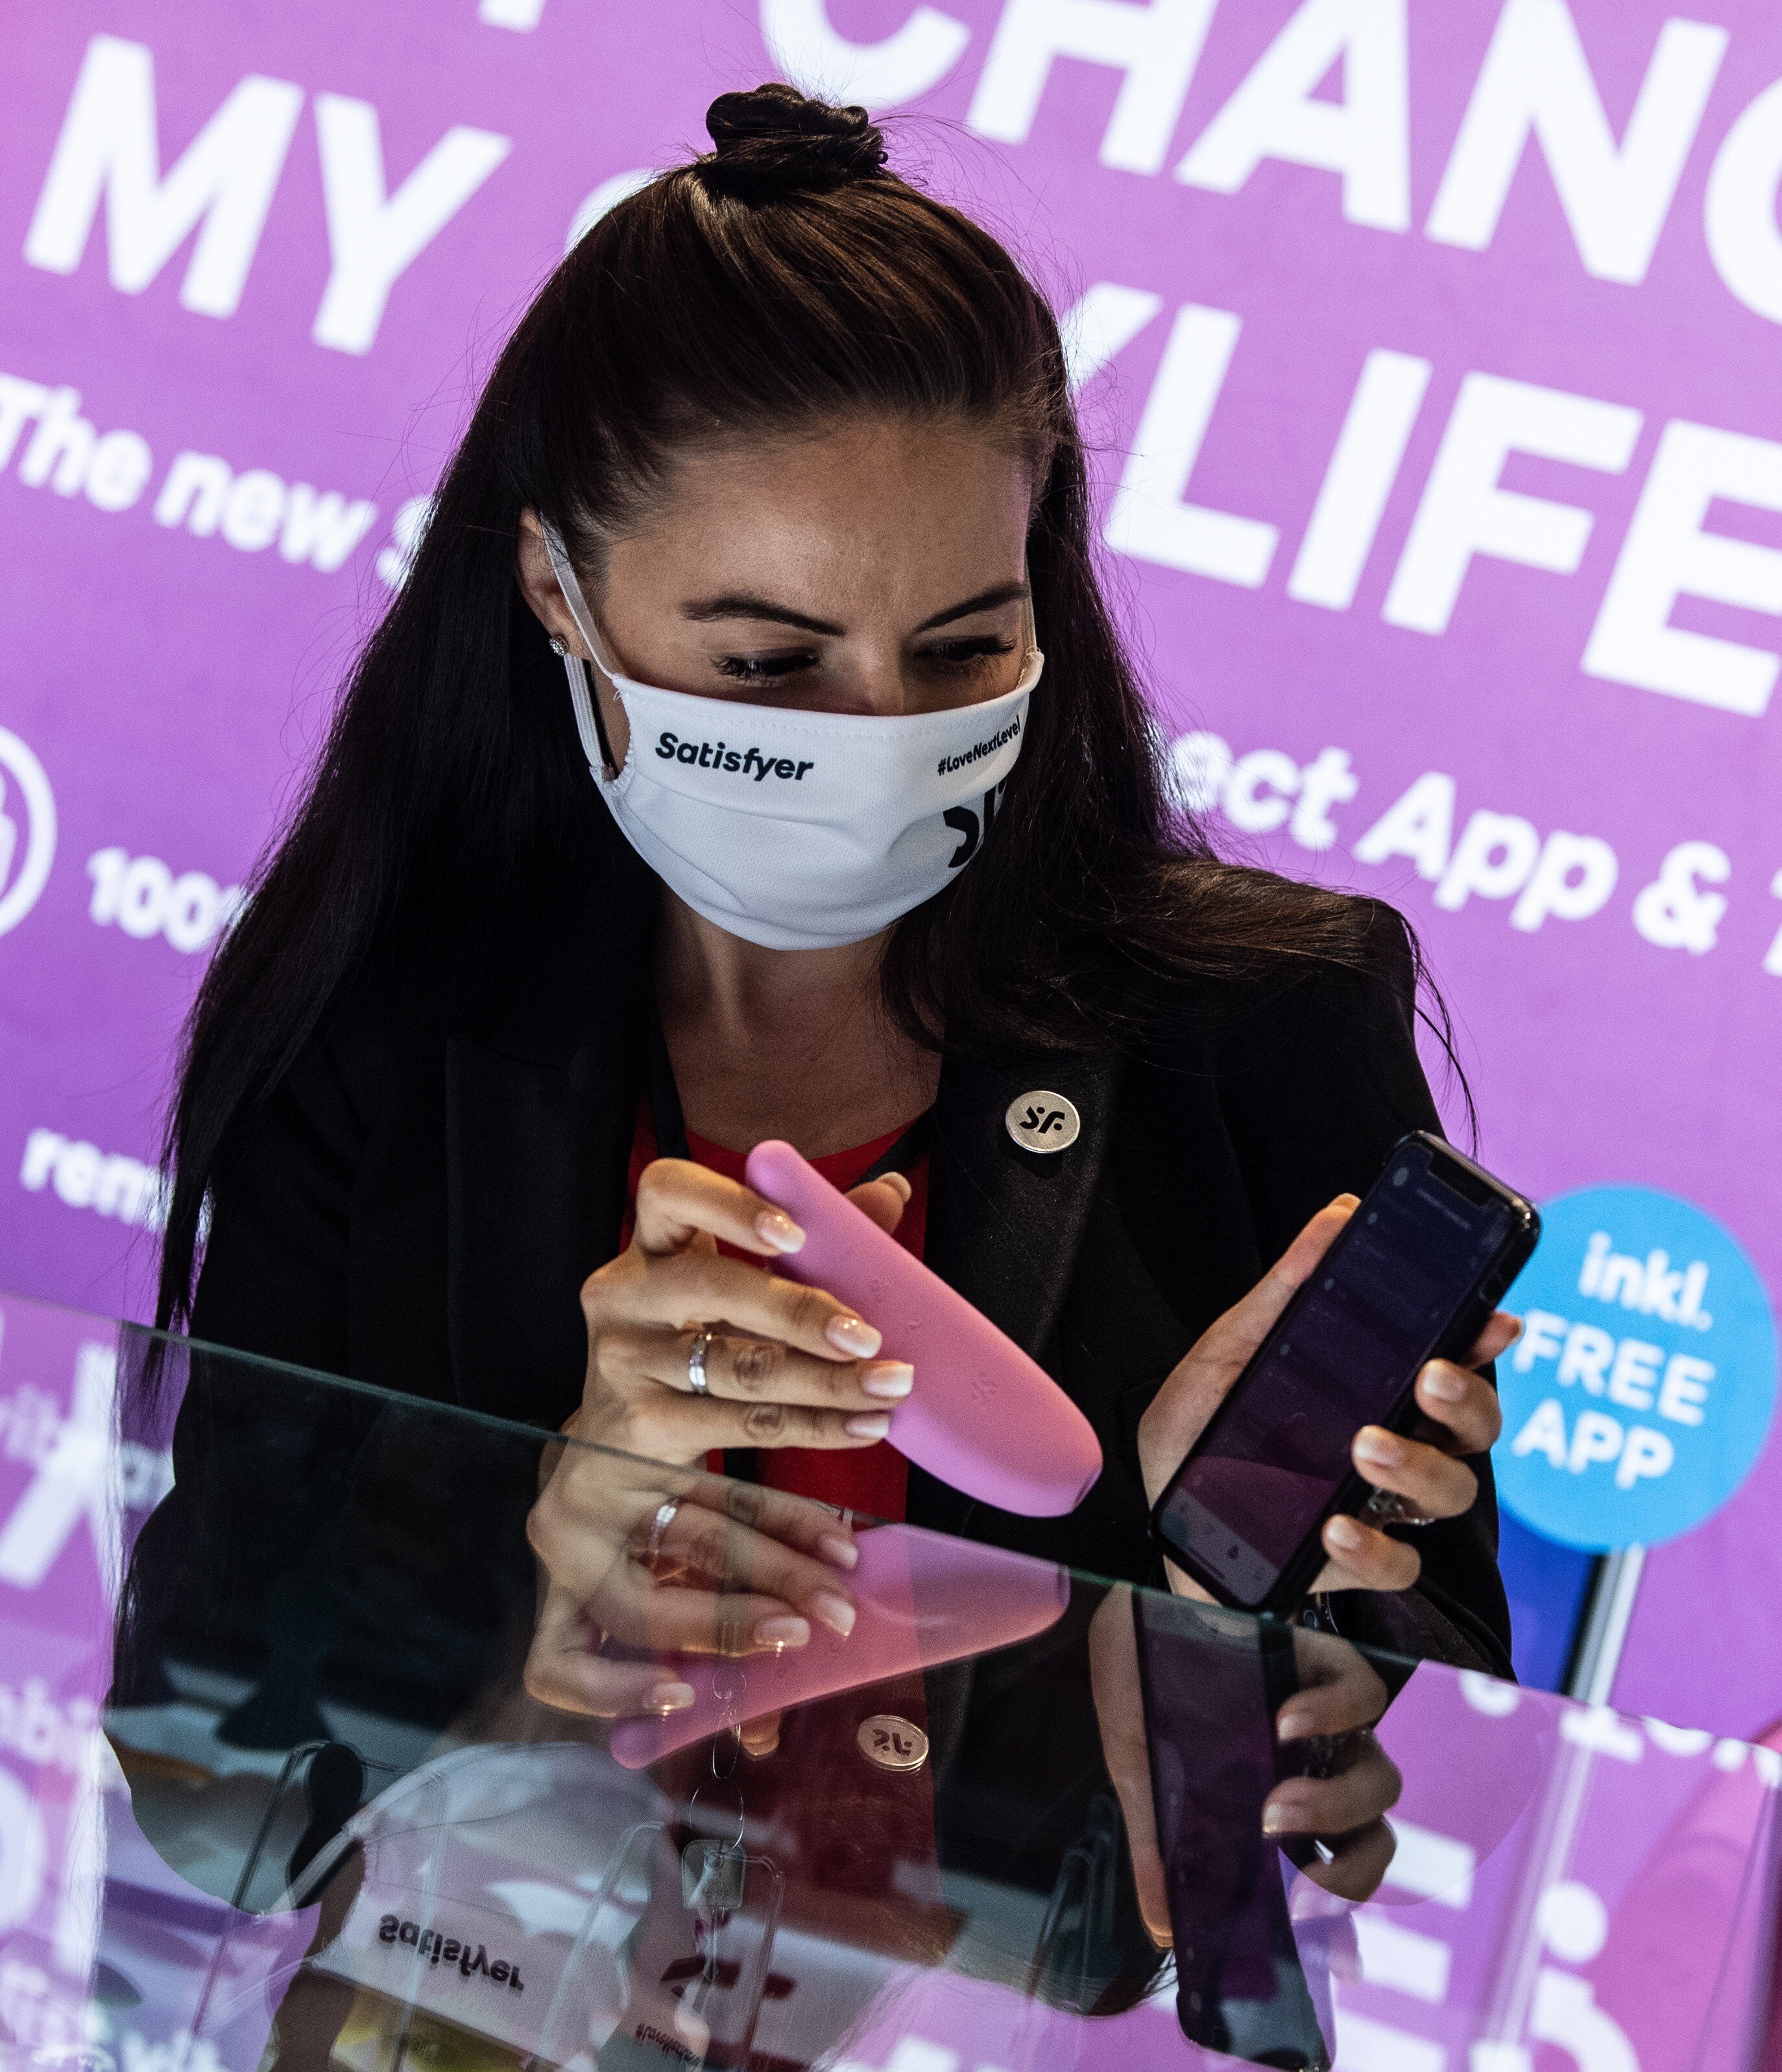 Sexual wellness brand Satisfyer’s new app allows couples to remotely operate each other’s sex toys during lockdown. It was just one of the many gadgets aimed at helping to deal with coronavirus issues at this year’s IFA 2020 in Berlin. Photo: EPA-EFE